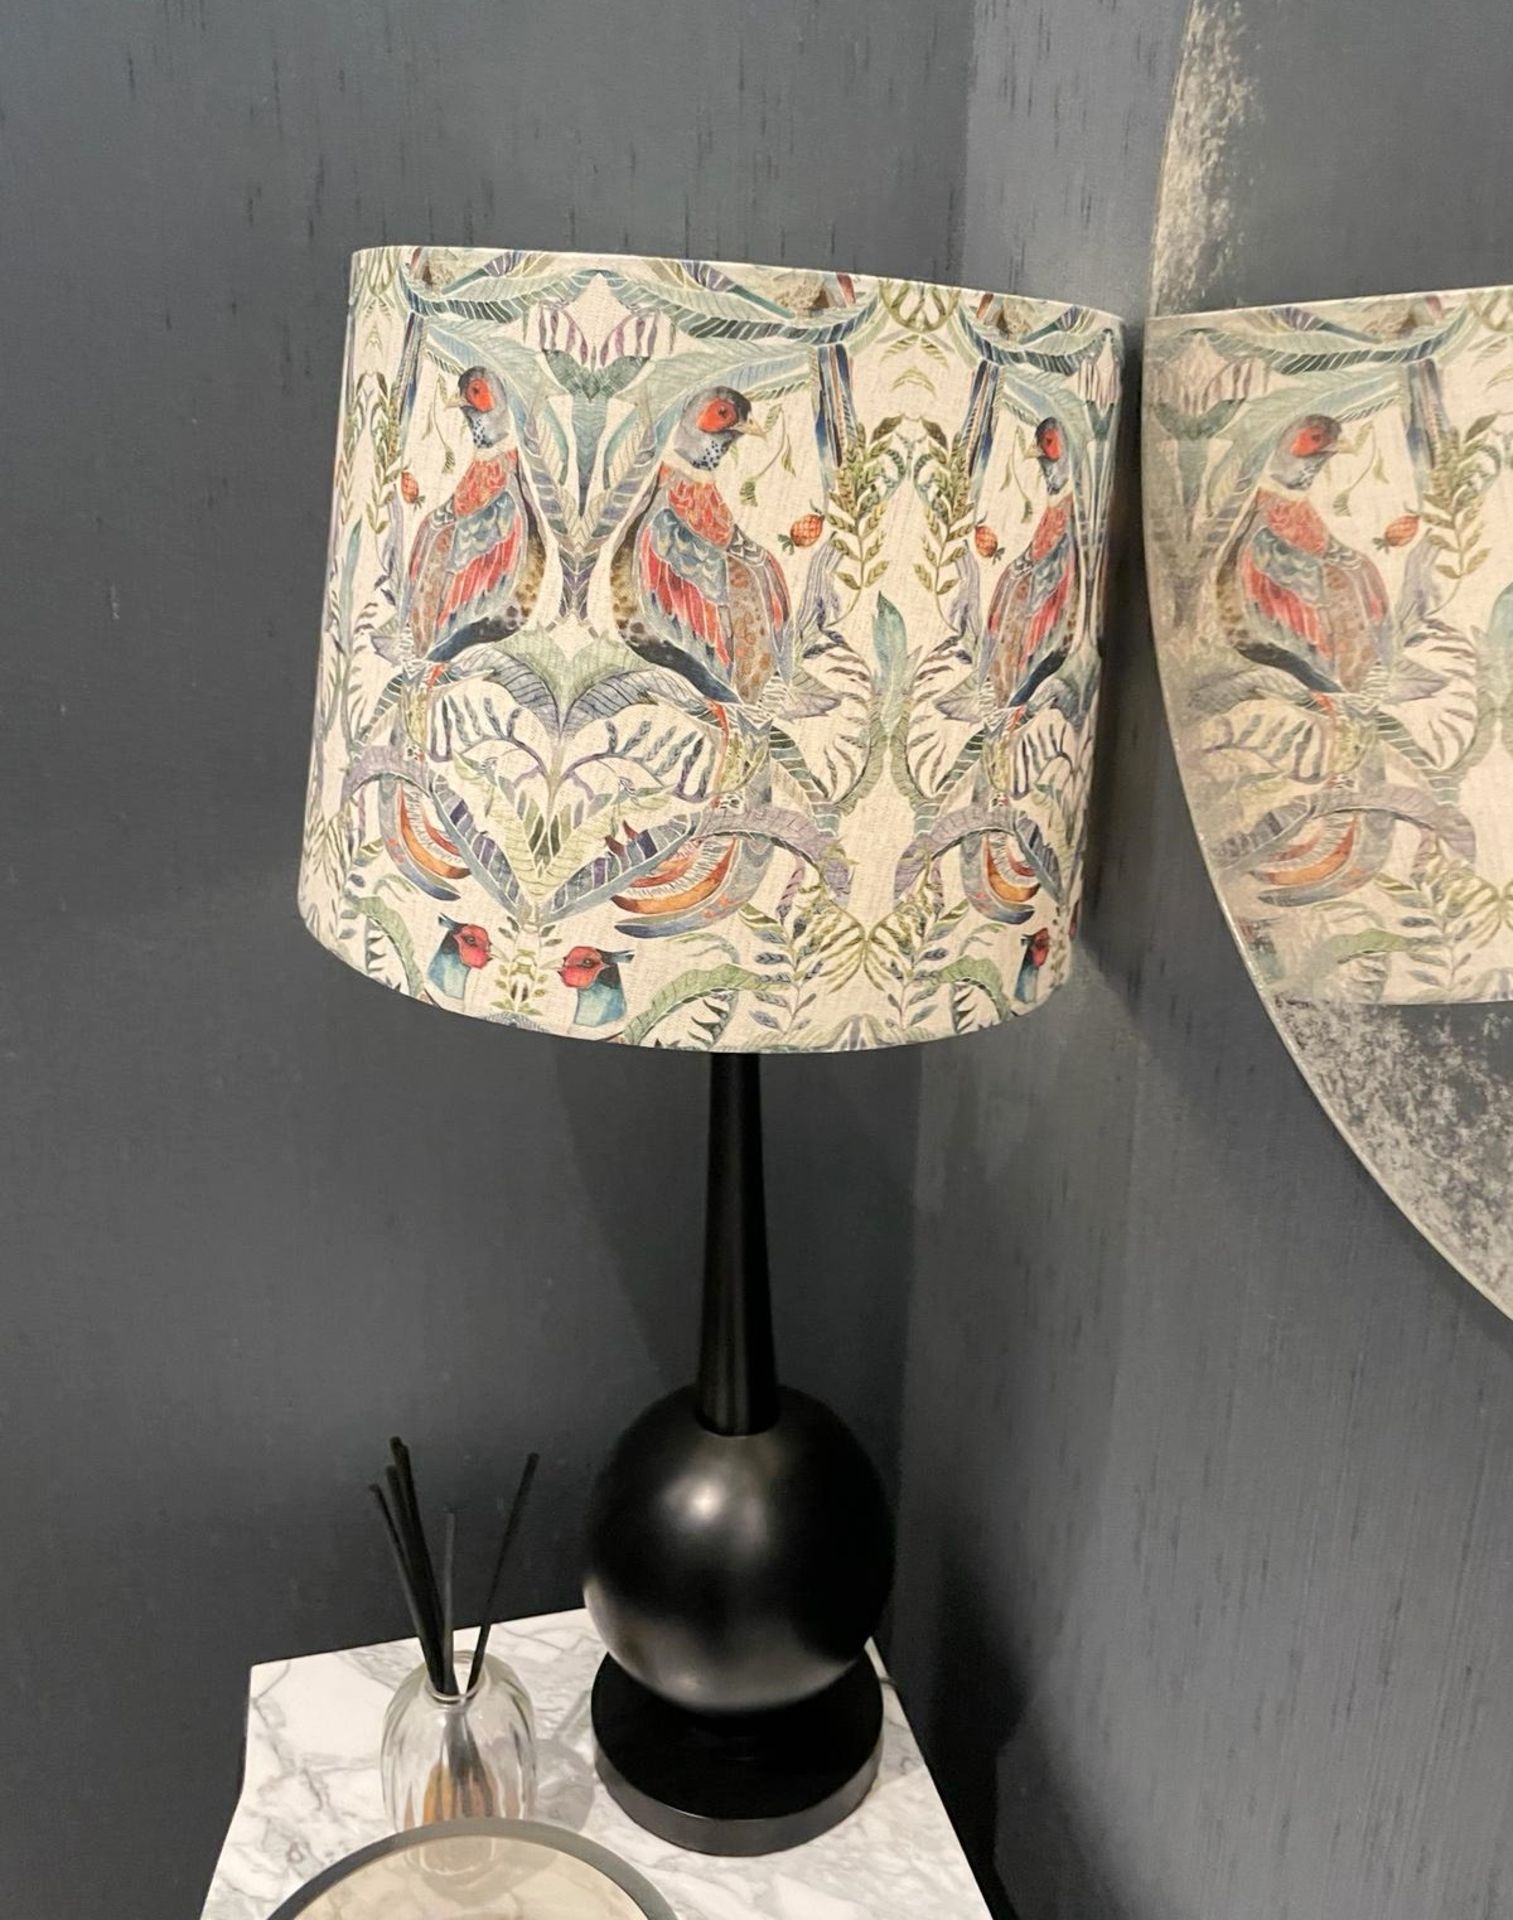 1 x Sleek Designer Table Lamp With Large Decorated Shade, 85cm Tall - CL894 - NO VAT ON THE HAMMER - Image 2 of 5